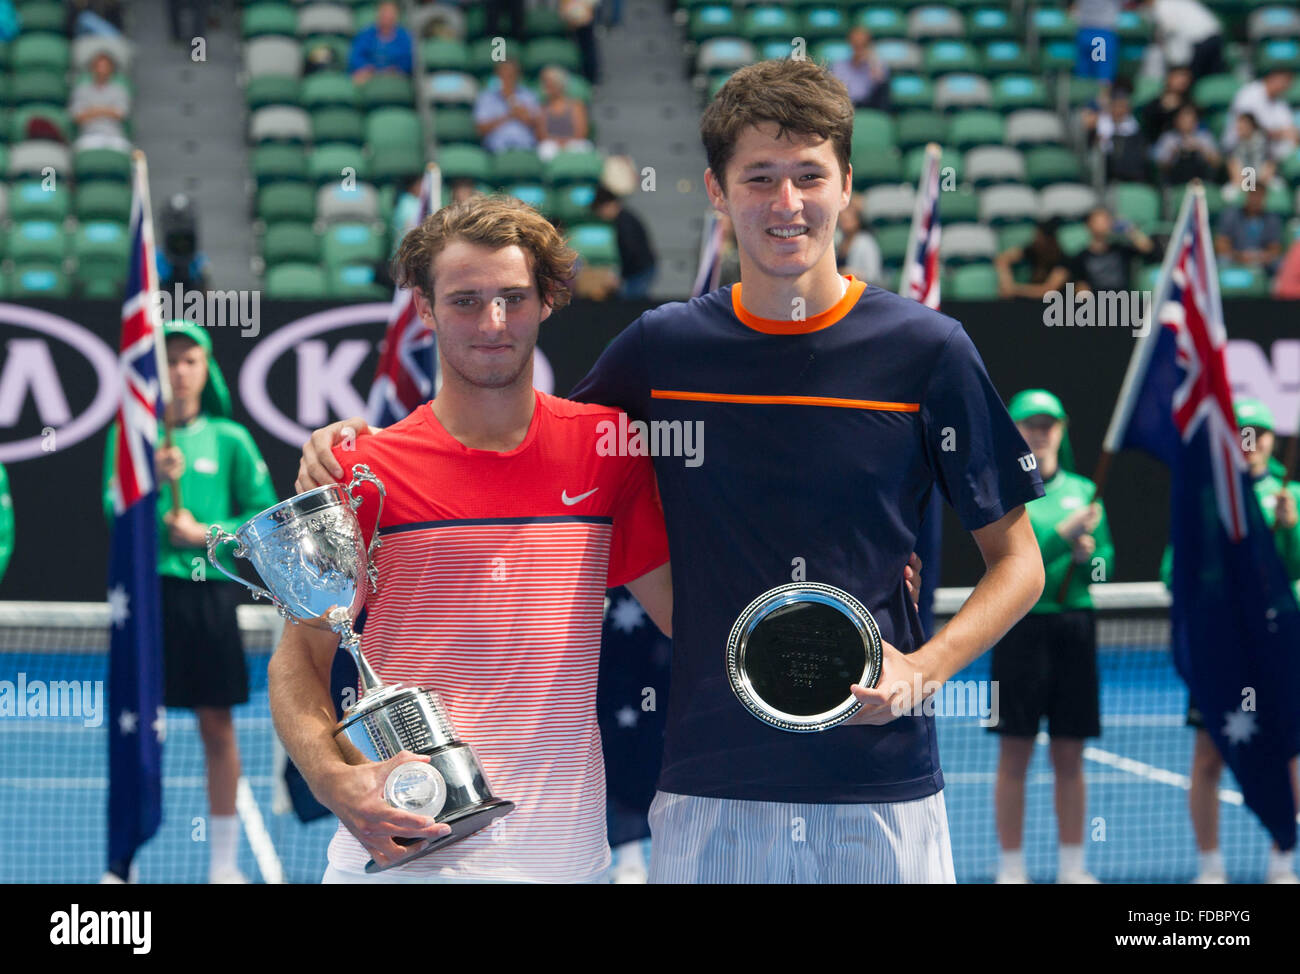 Melbourne, Australia. 30th Jan, 2016. Oliver Anderson (L) of Australia and Jurabeck Karimov of Uzbekistan pose during the award ceremony after their junior boys' singles final match at Australian Open Tennis